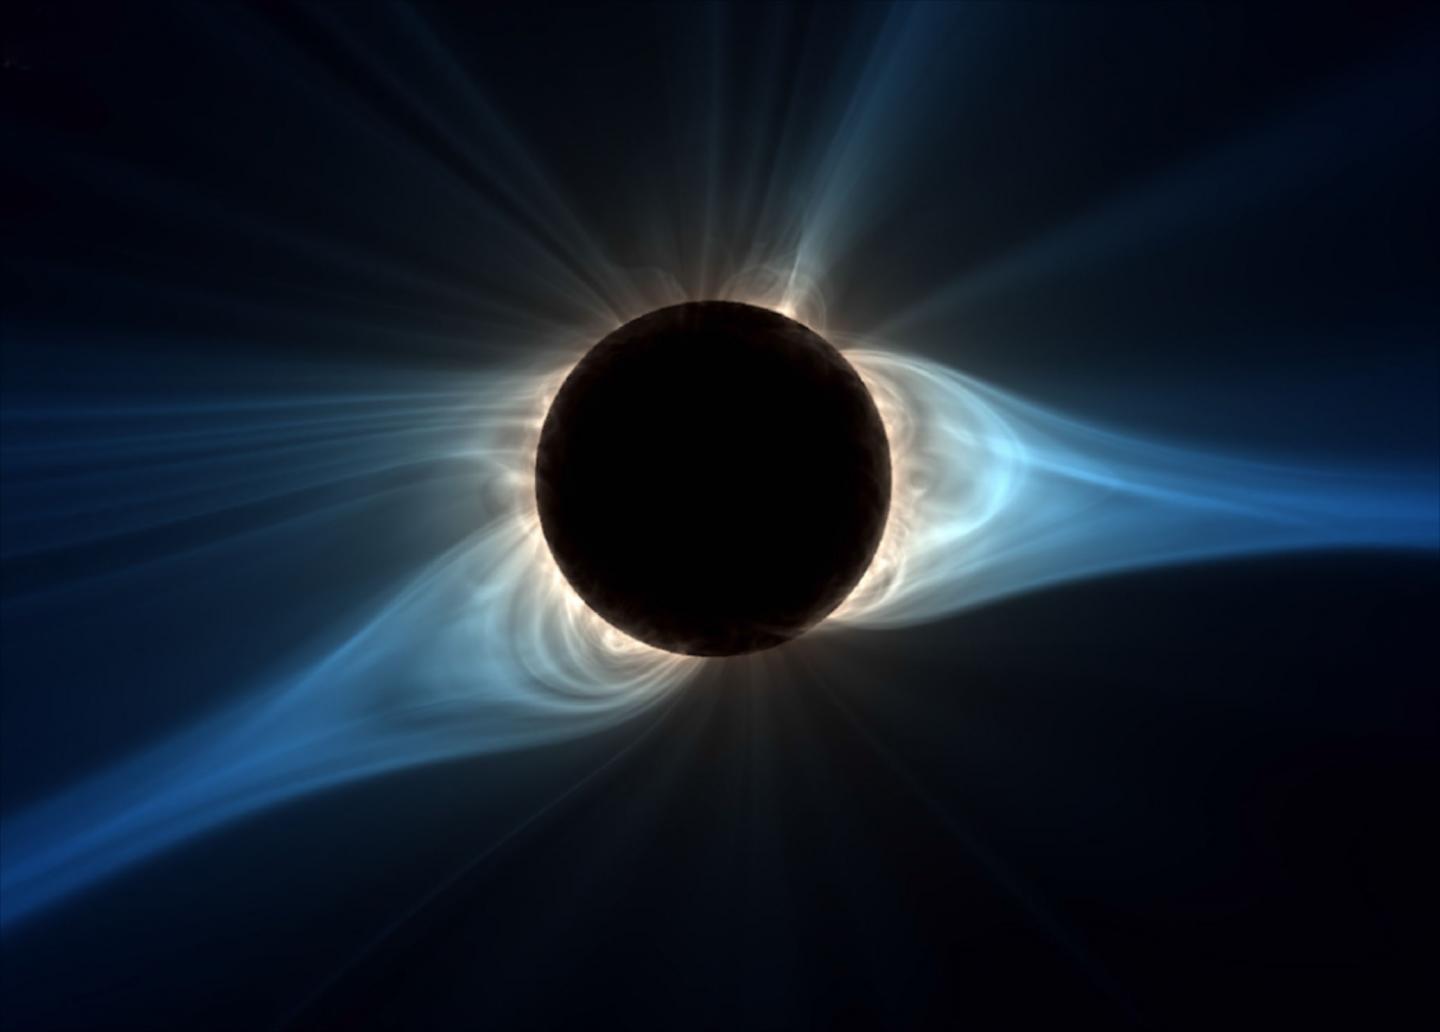 Computer Model's Predicted View of Corona for Aug. 21, 2017, Total Solar Eclipse